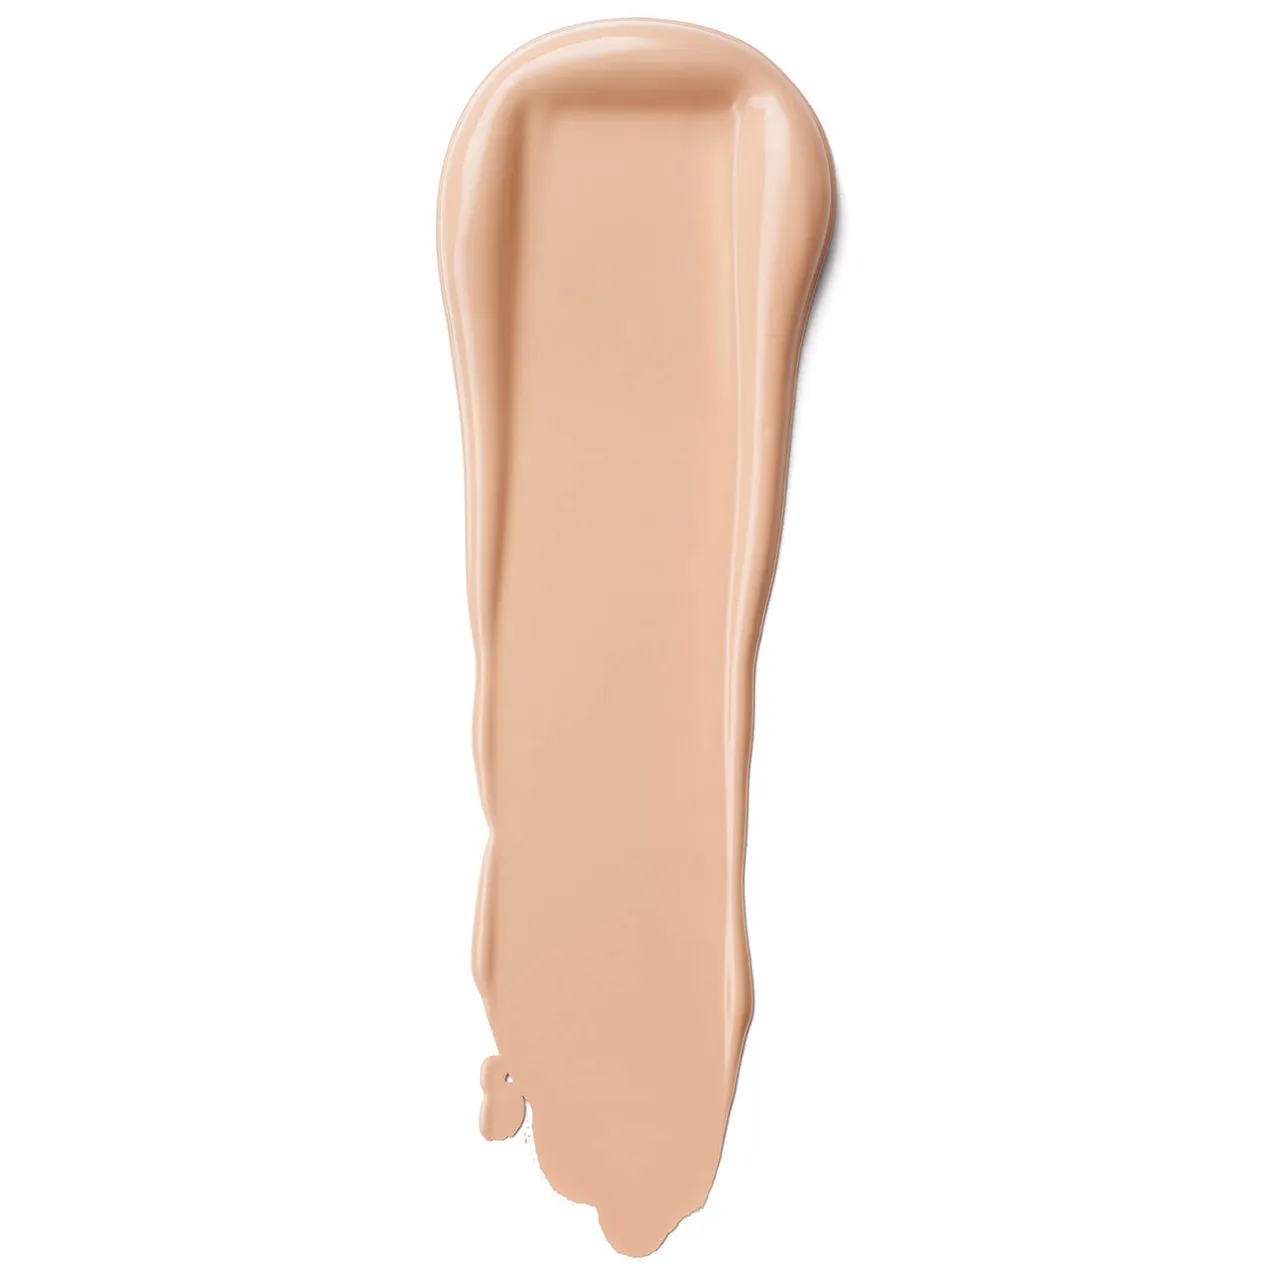 Clinique Beyond Perfecting Foundation and Concealer 30ml (Various Shades) - Ivory